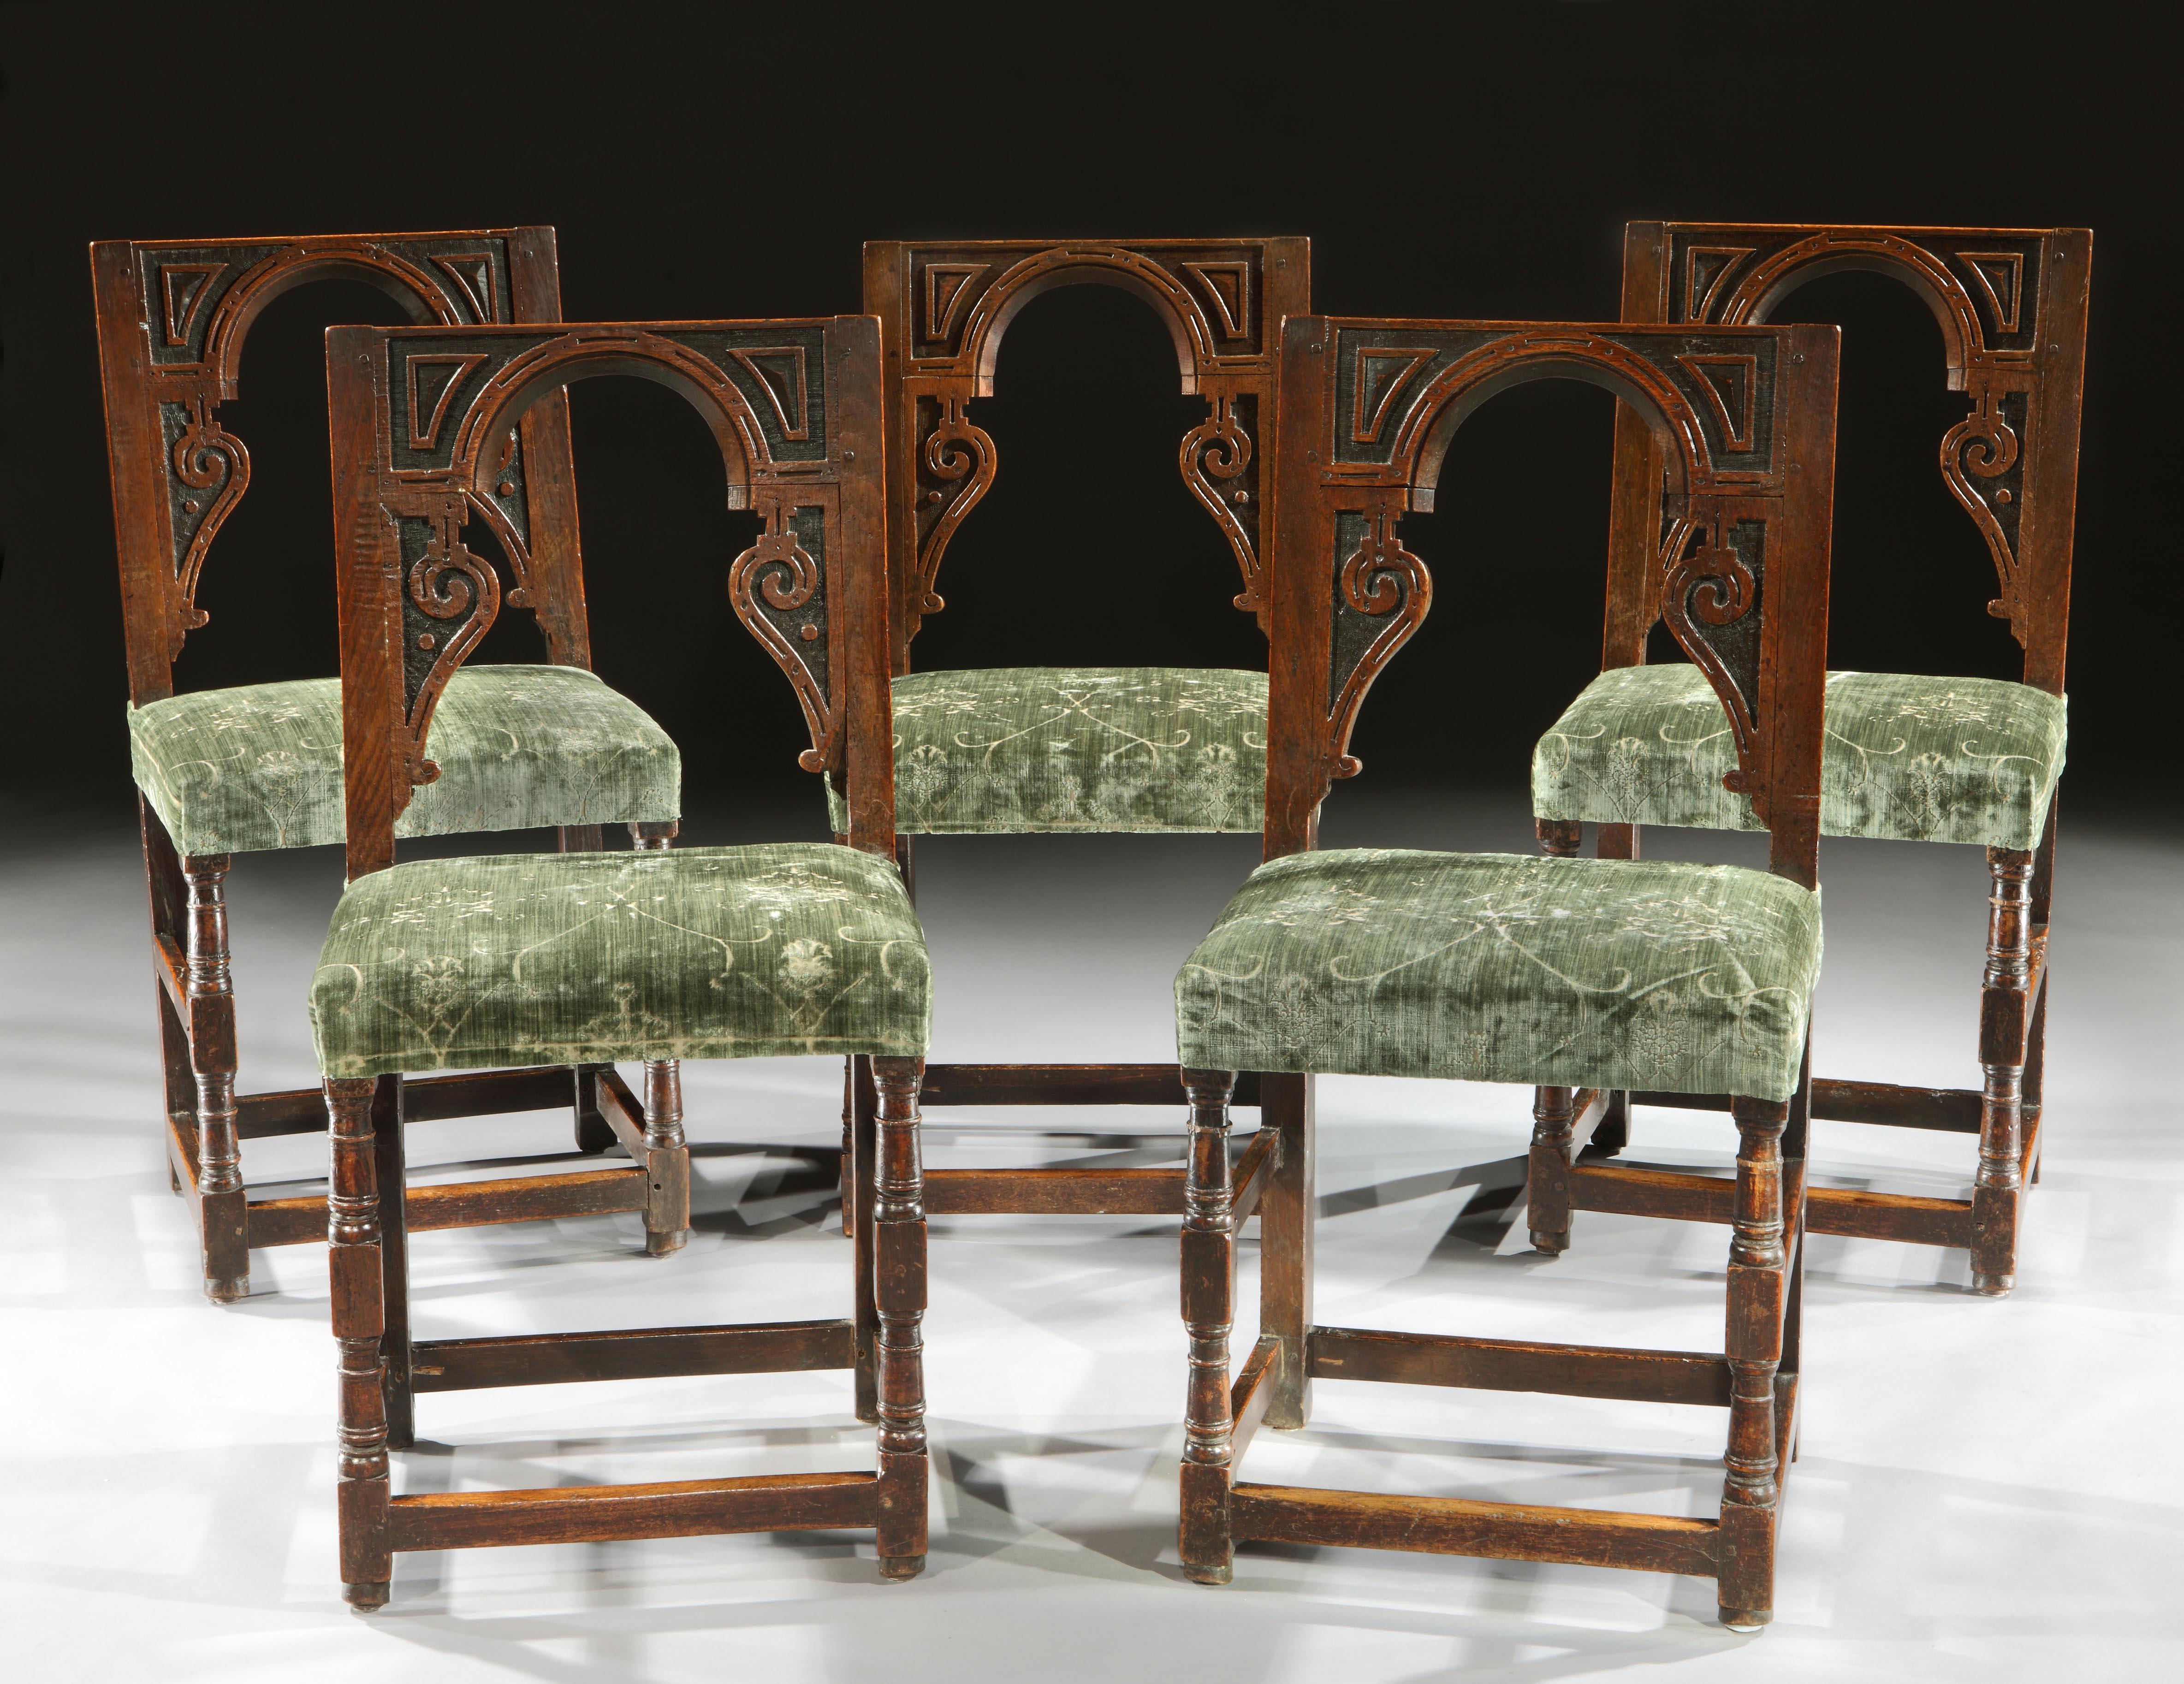 A set of exceptionally rare, English, late-Renaissance, oak, architectural, backstools upholstered in a sage green 19th century Renaissance-revival velvet

- The architectural inspired backs on these chairs are striking and they look very dramatic